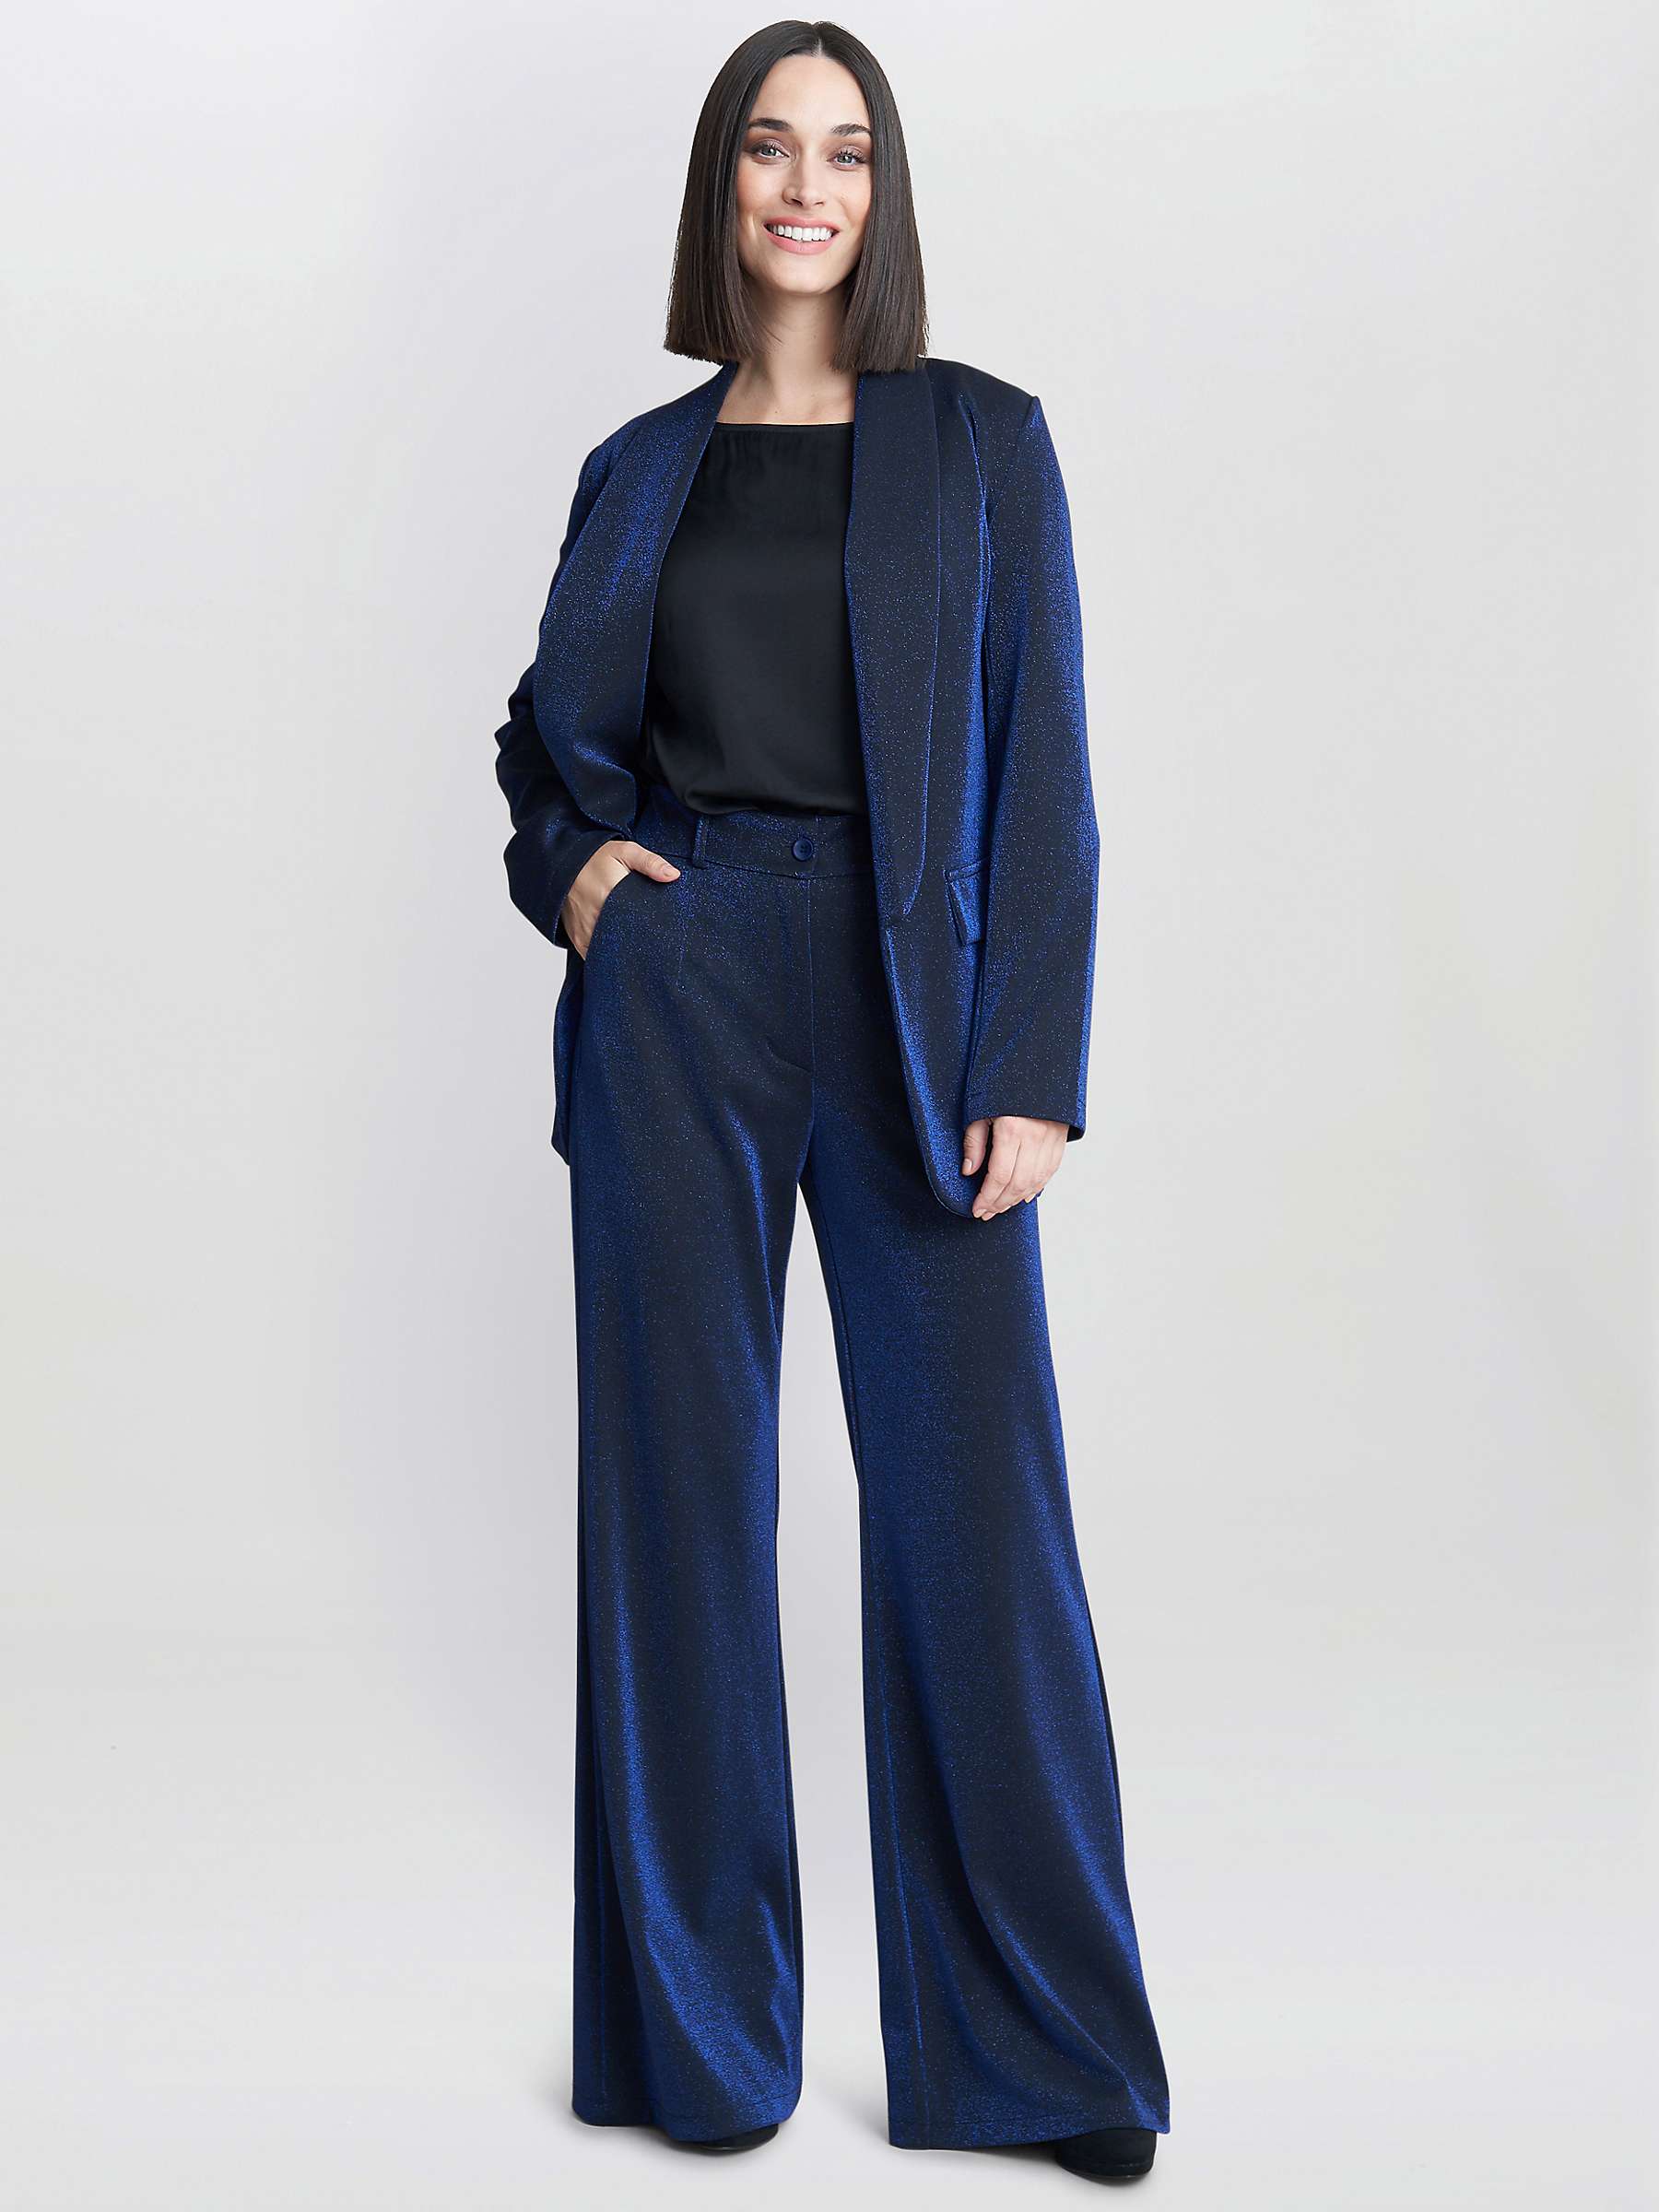 Buy Gina Bacconi Genevive Stretch Metalic Trouser Suit, Navy Online at johnlewis.com